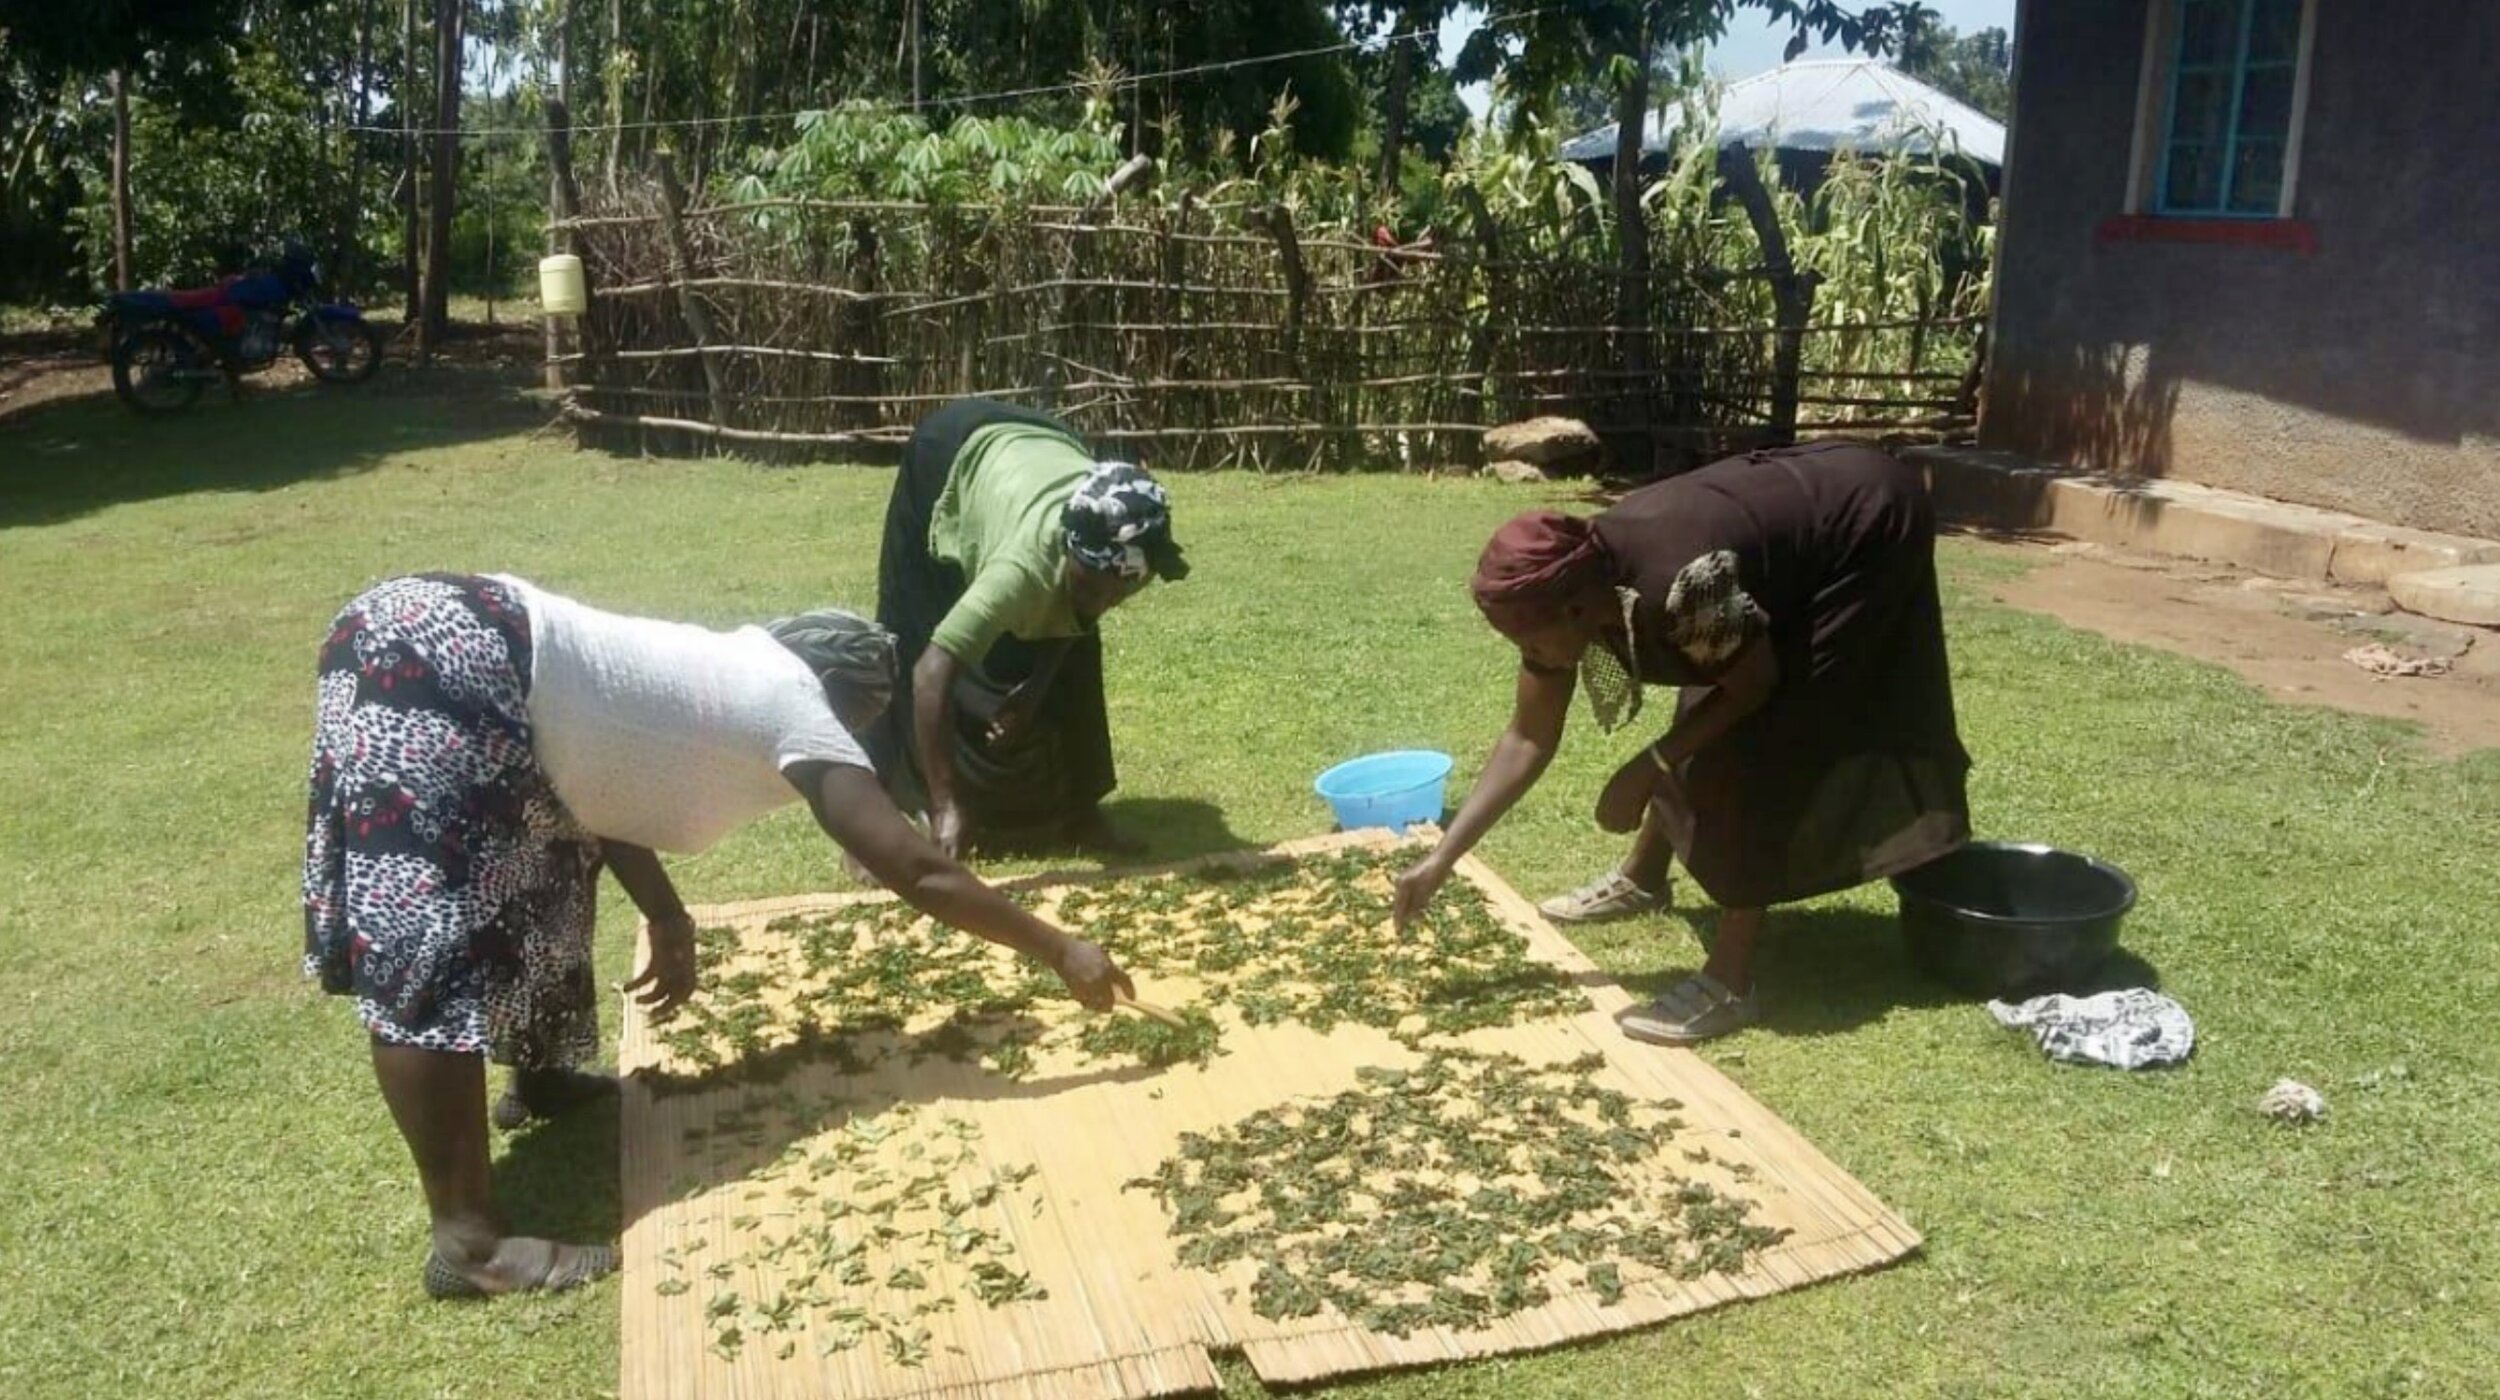  Widows sun drying their vegetables to preserve after harvesting. 